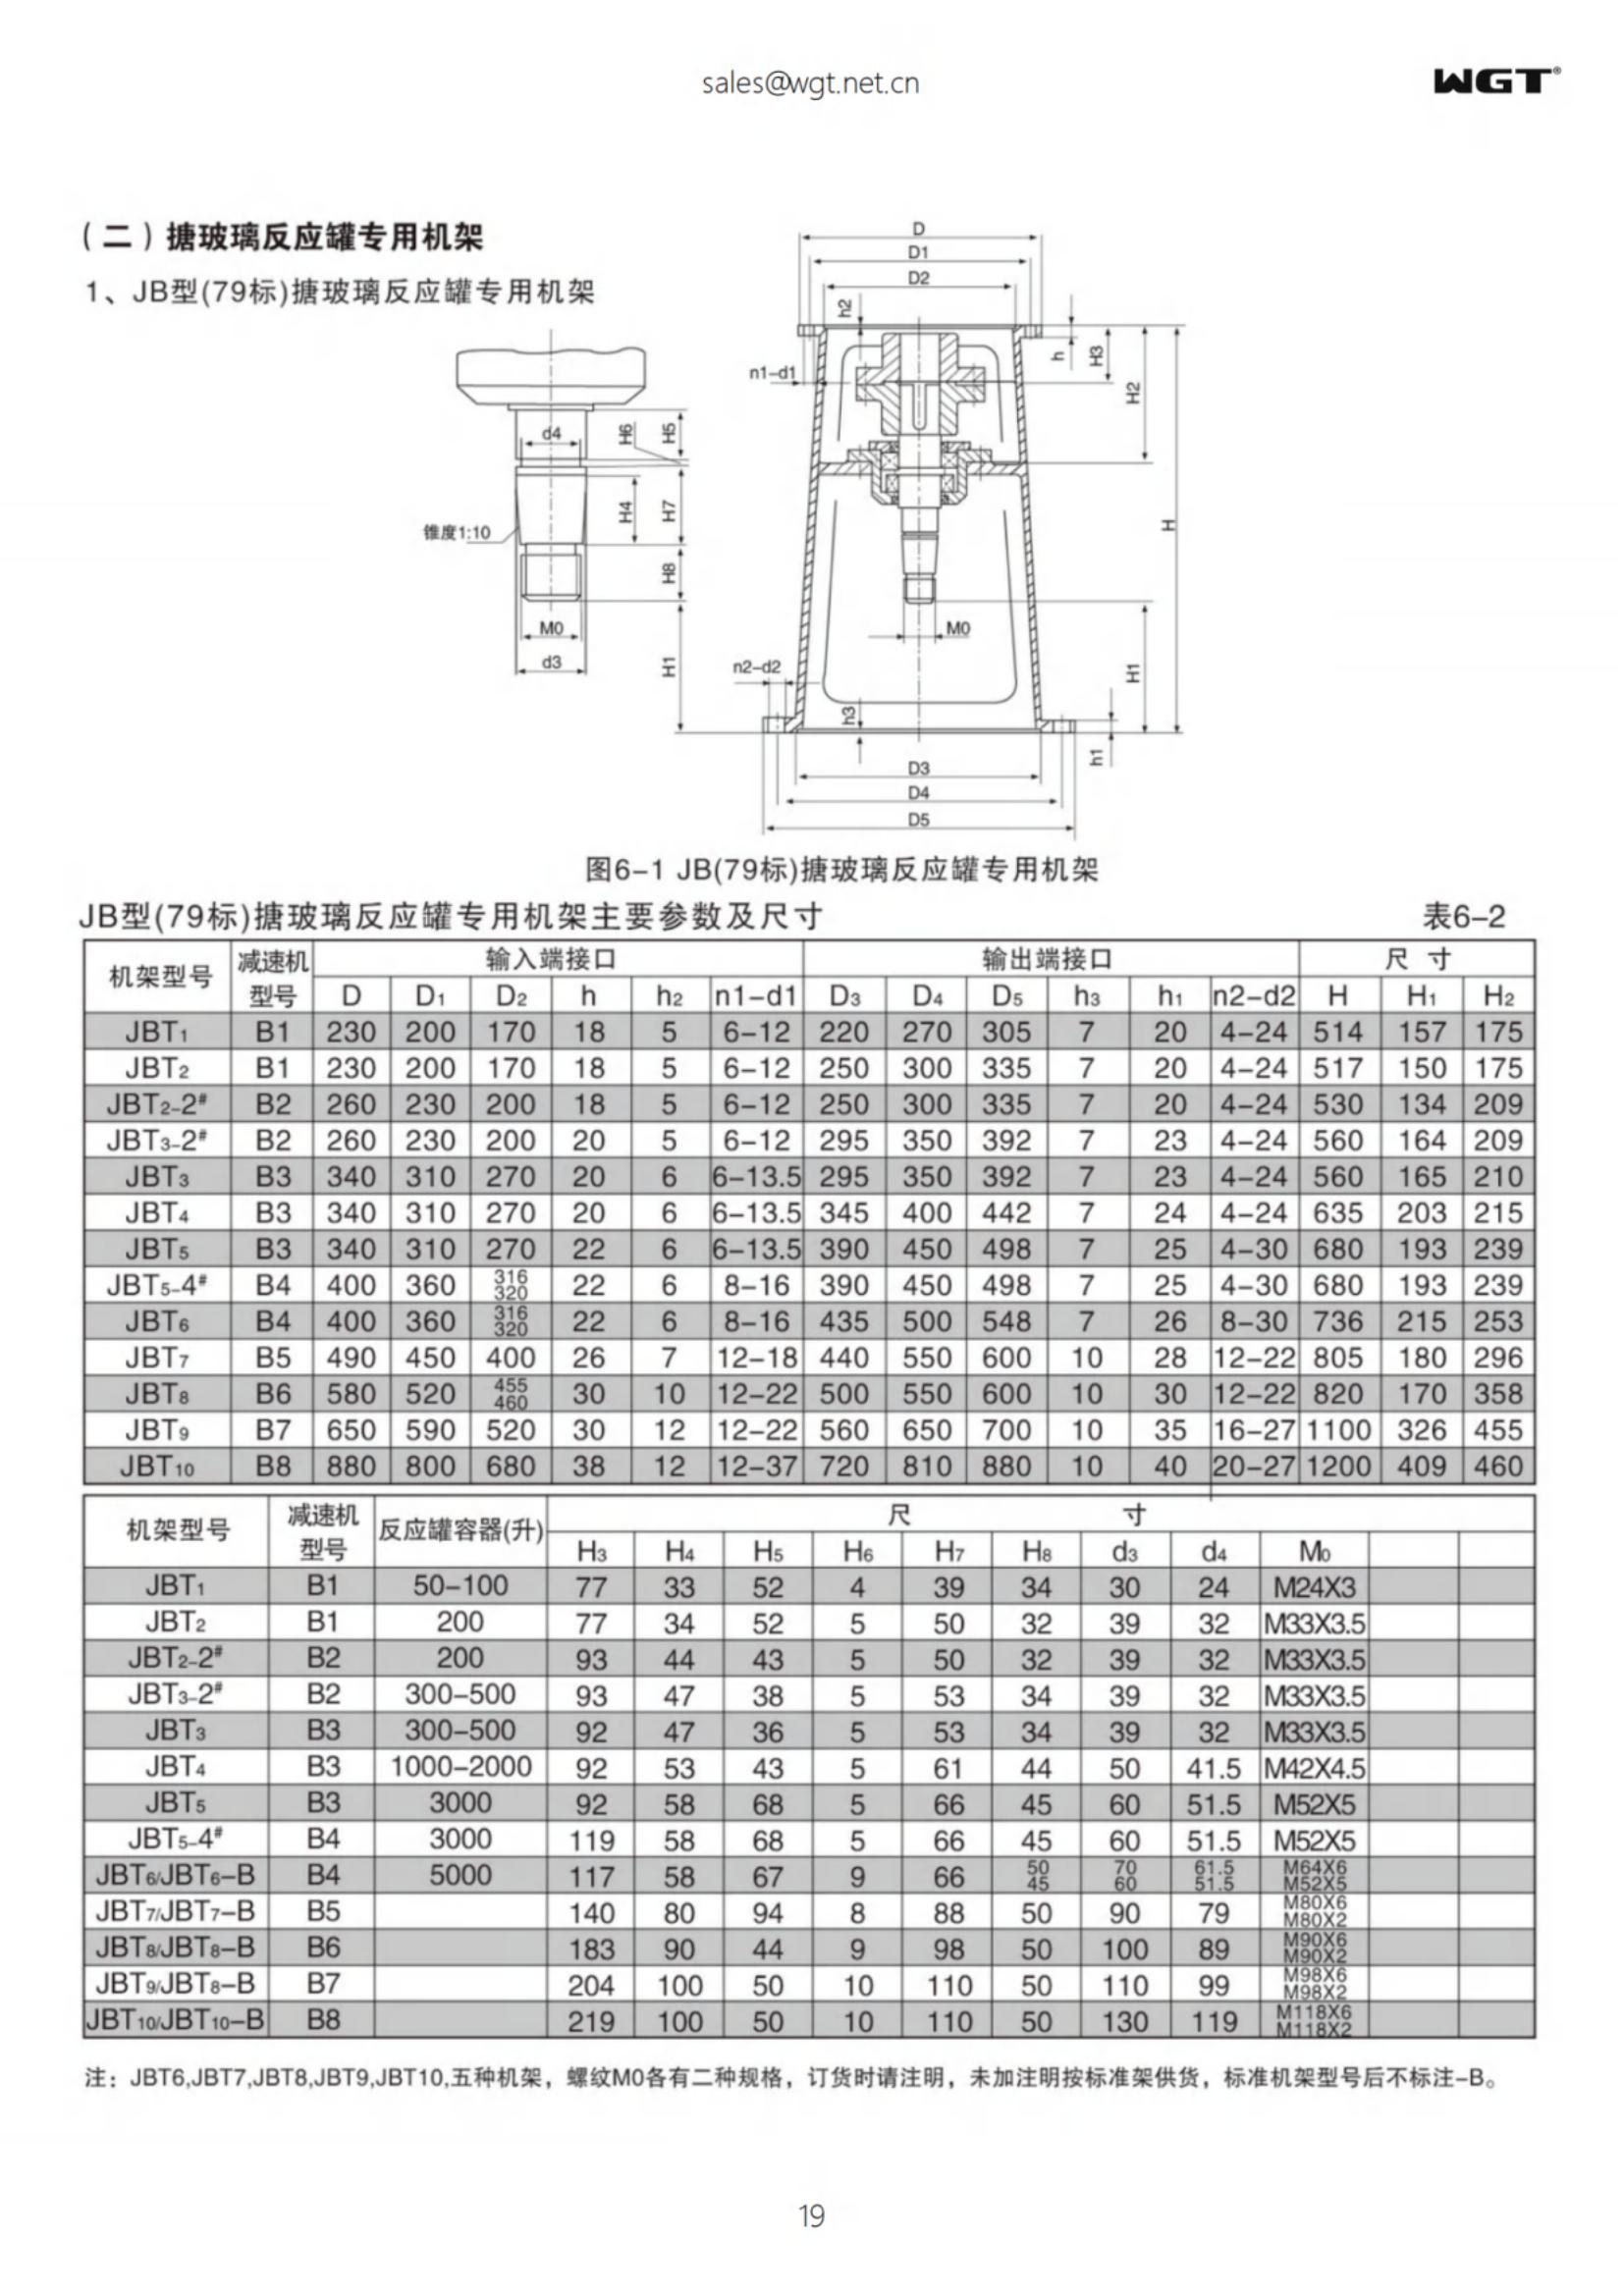 JBT10-B special frame for glass-lined reaction tank